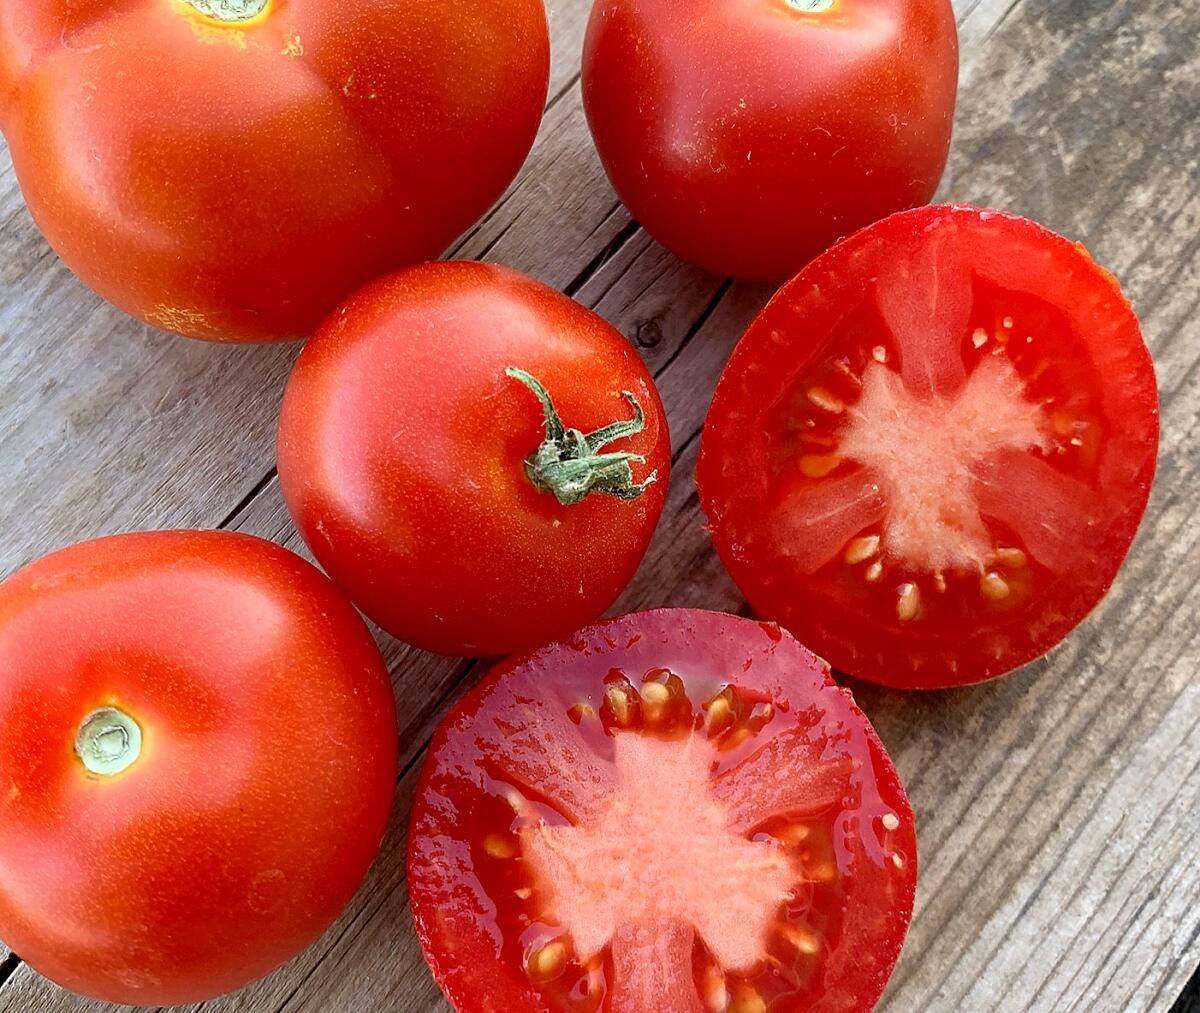 Several Cyril's Choice tomatoes, a tasty red heirloom, on a table with one sliced in half.